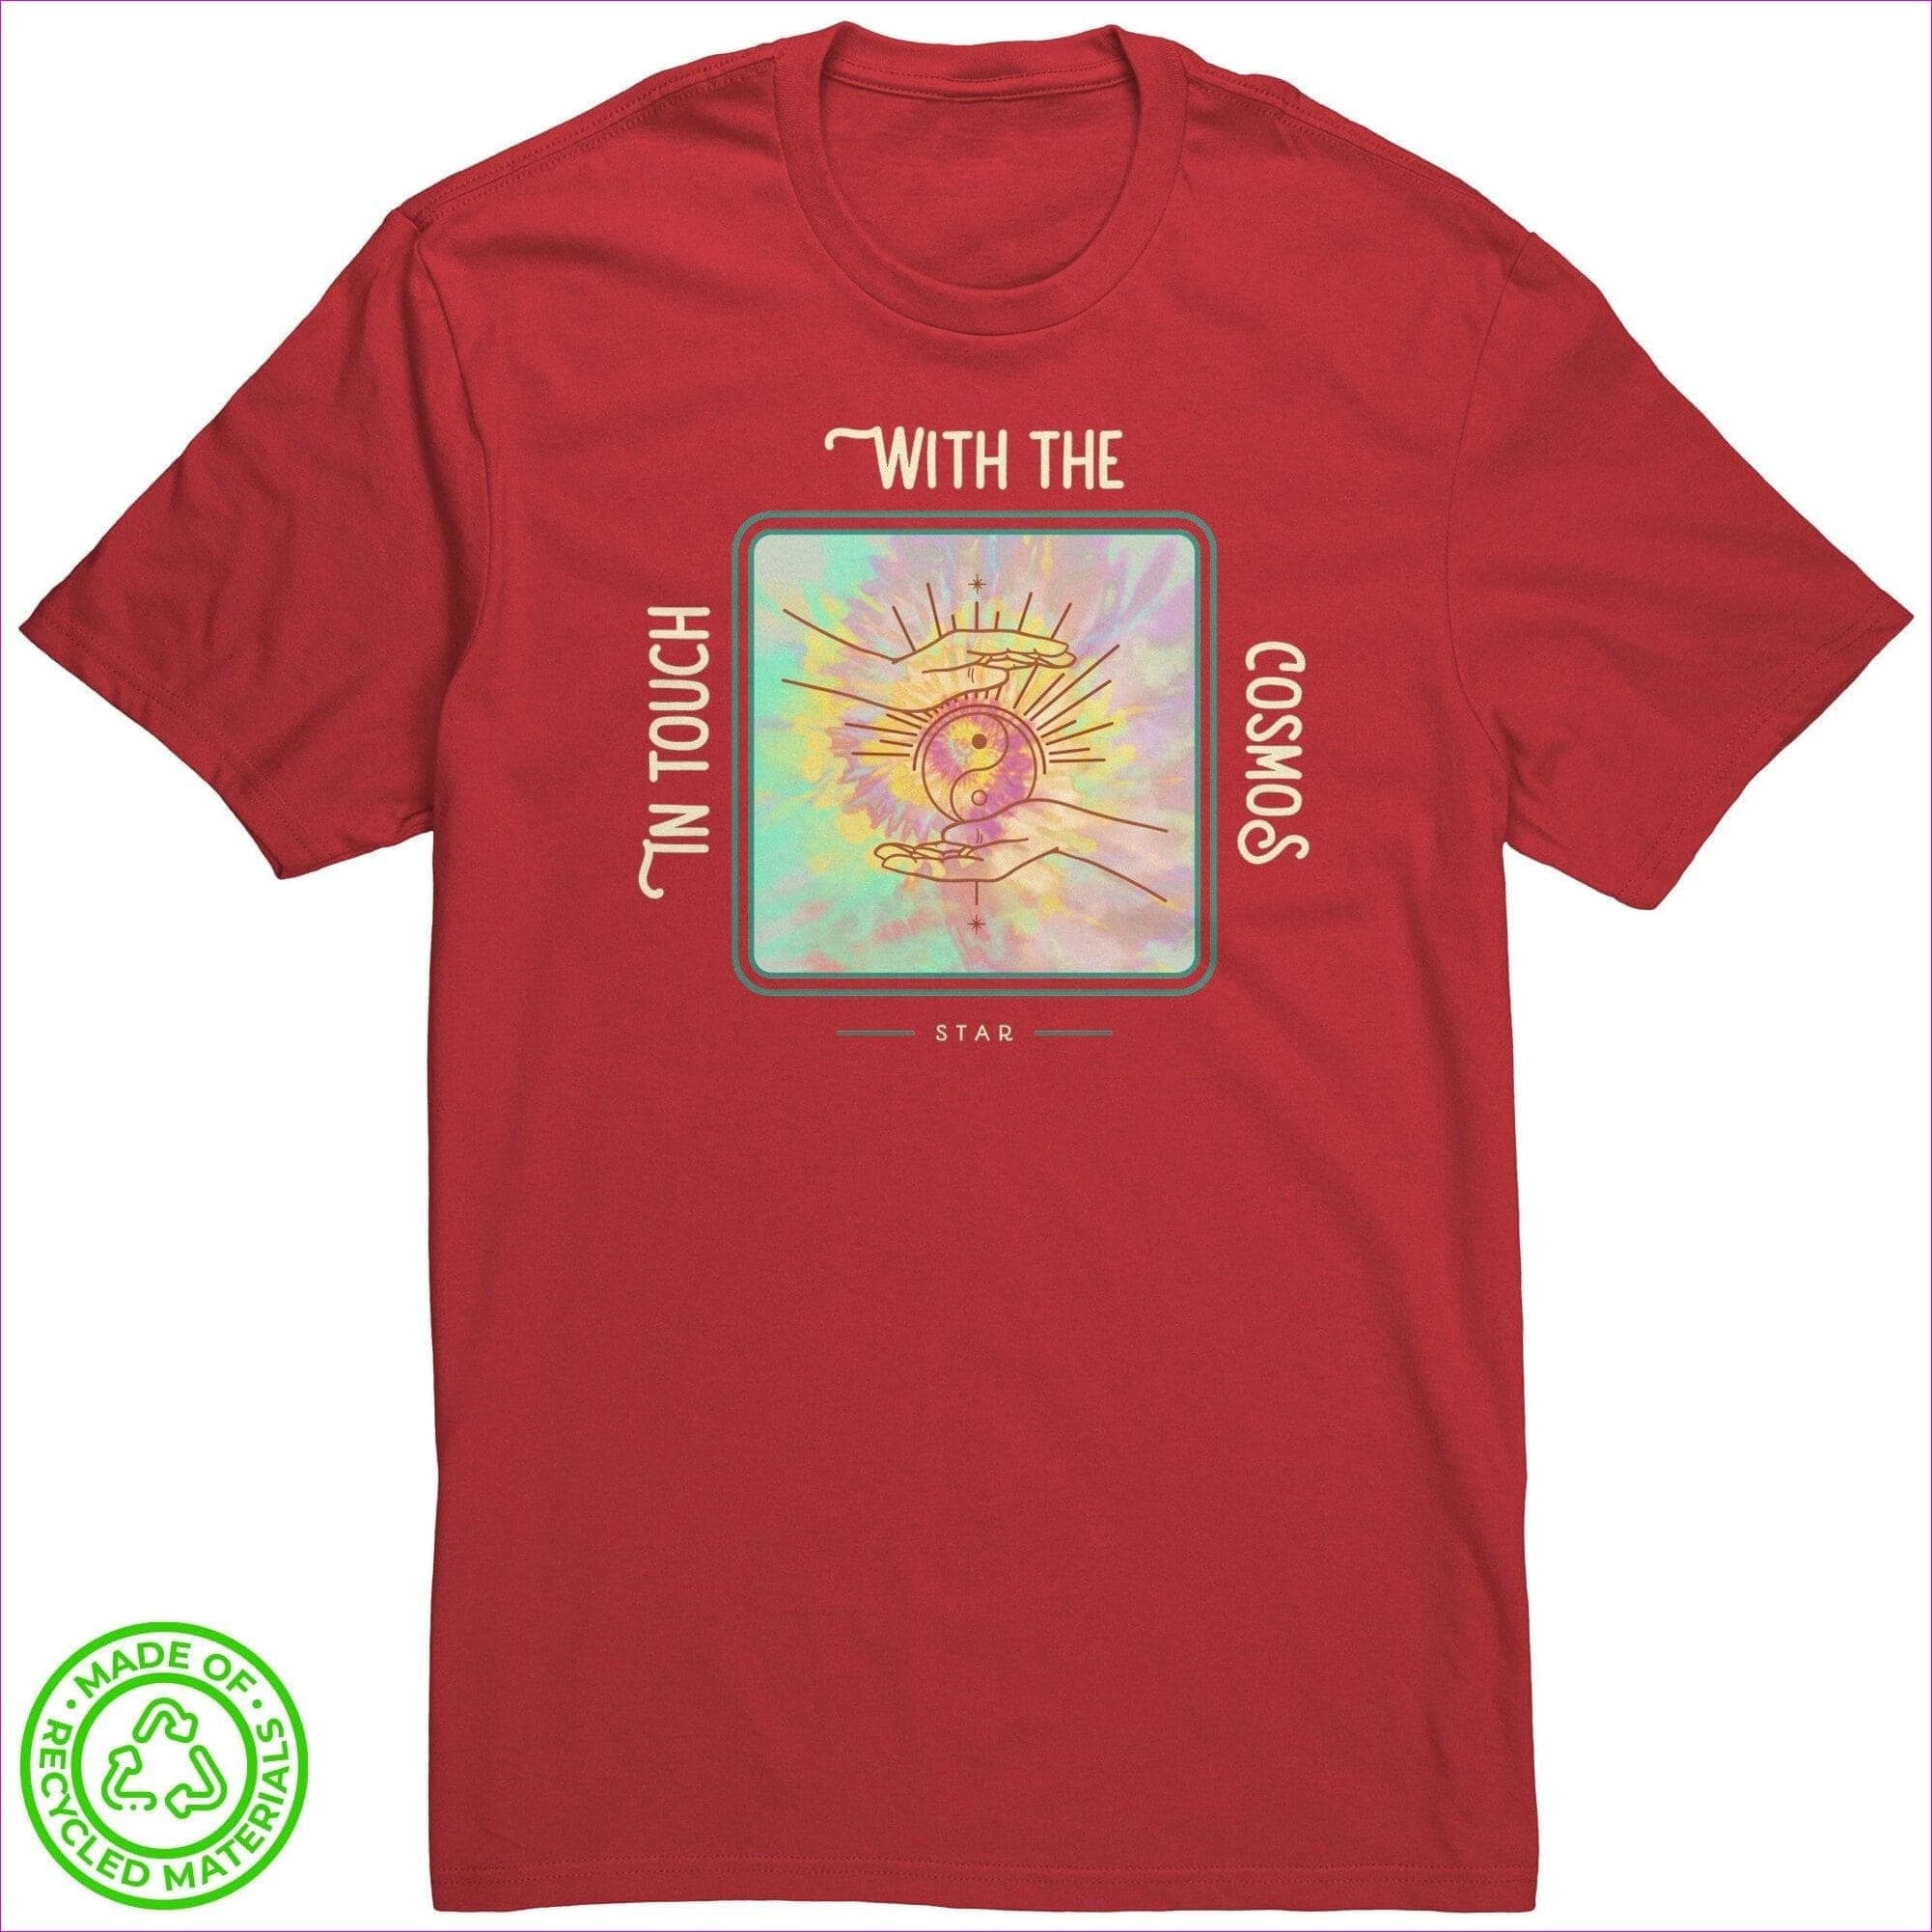 Ruby Red - In Touch Recycled Fabric Unisex Tee - Unisex T-Shirt at TFC&H Co.